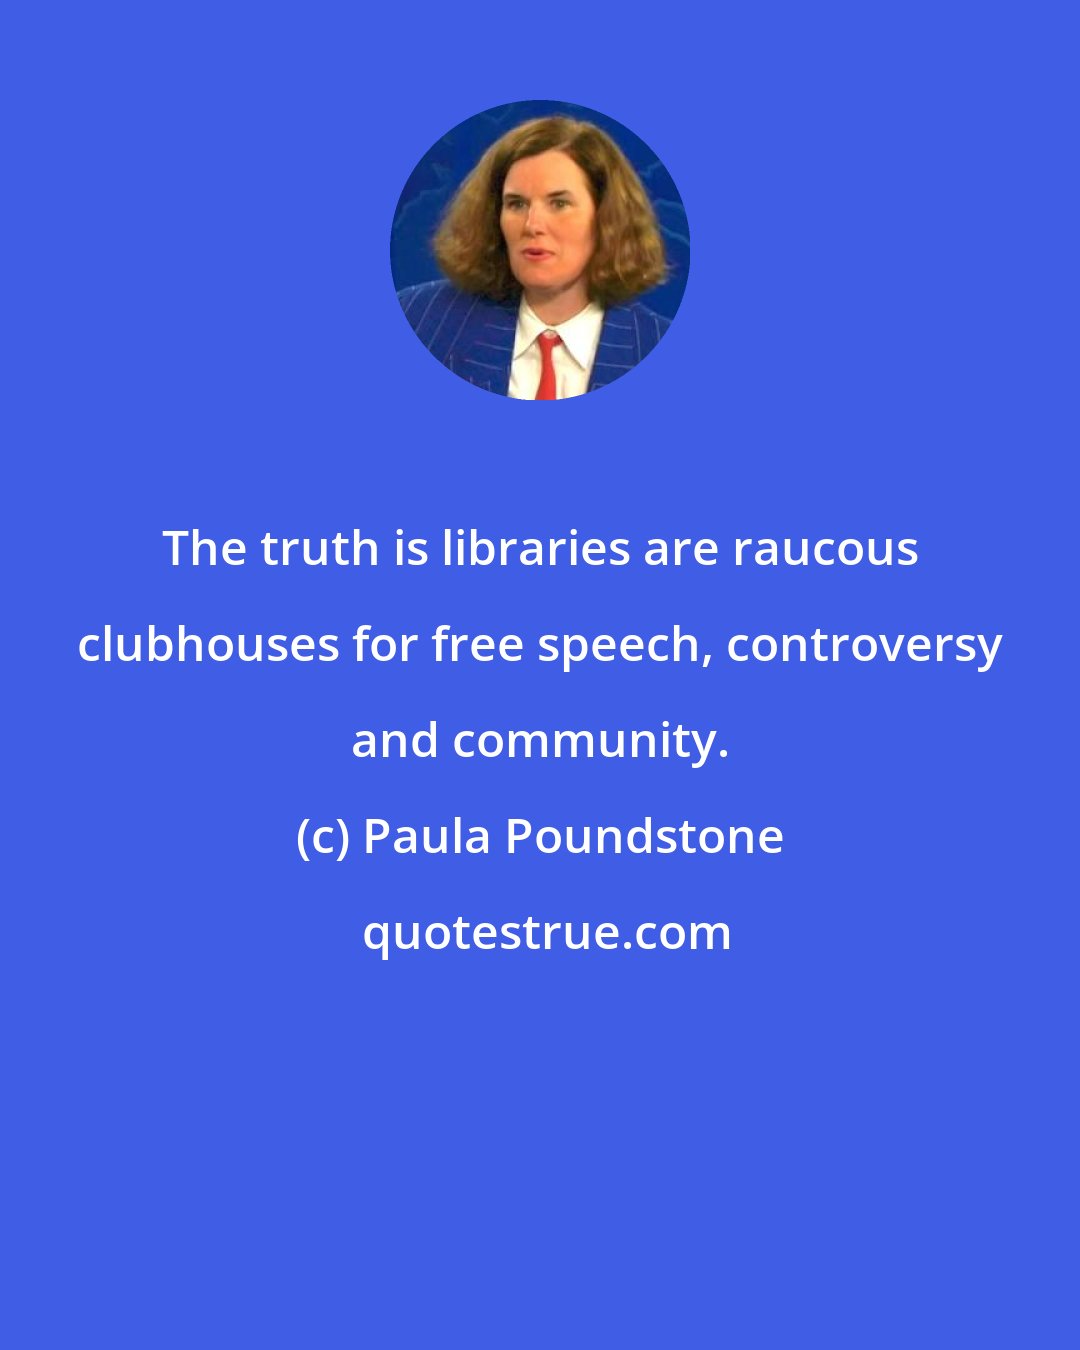 Paula Poundstone: The truth is libraries are raucous clubhouses for free speech, controversy and community.